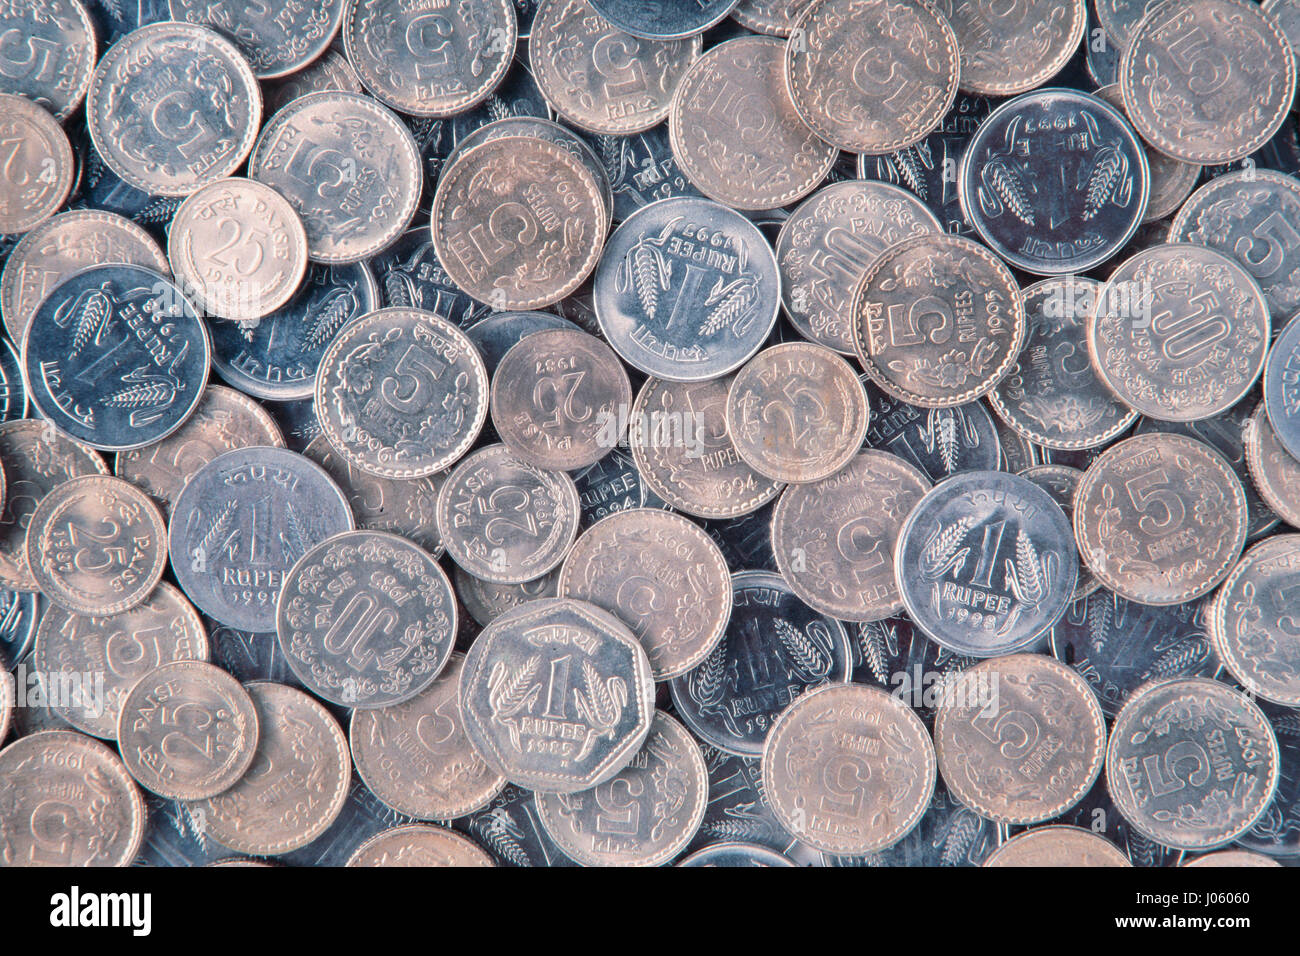 Indian currency coins, india, asia Stock Photo